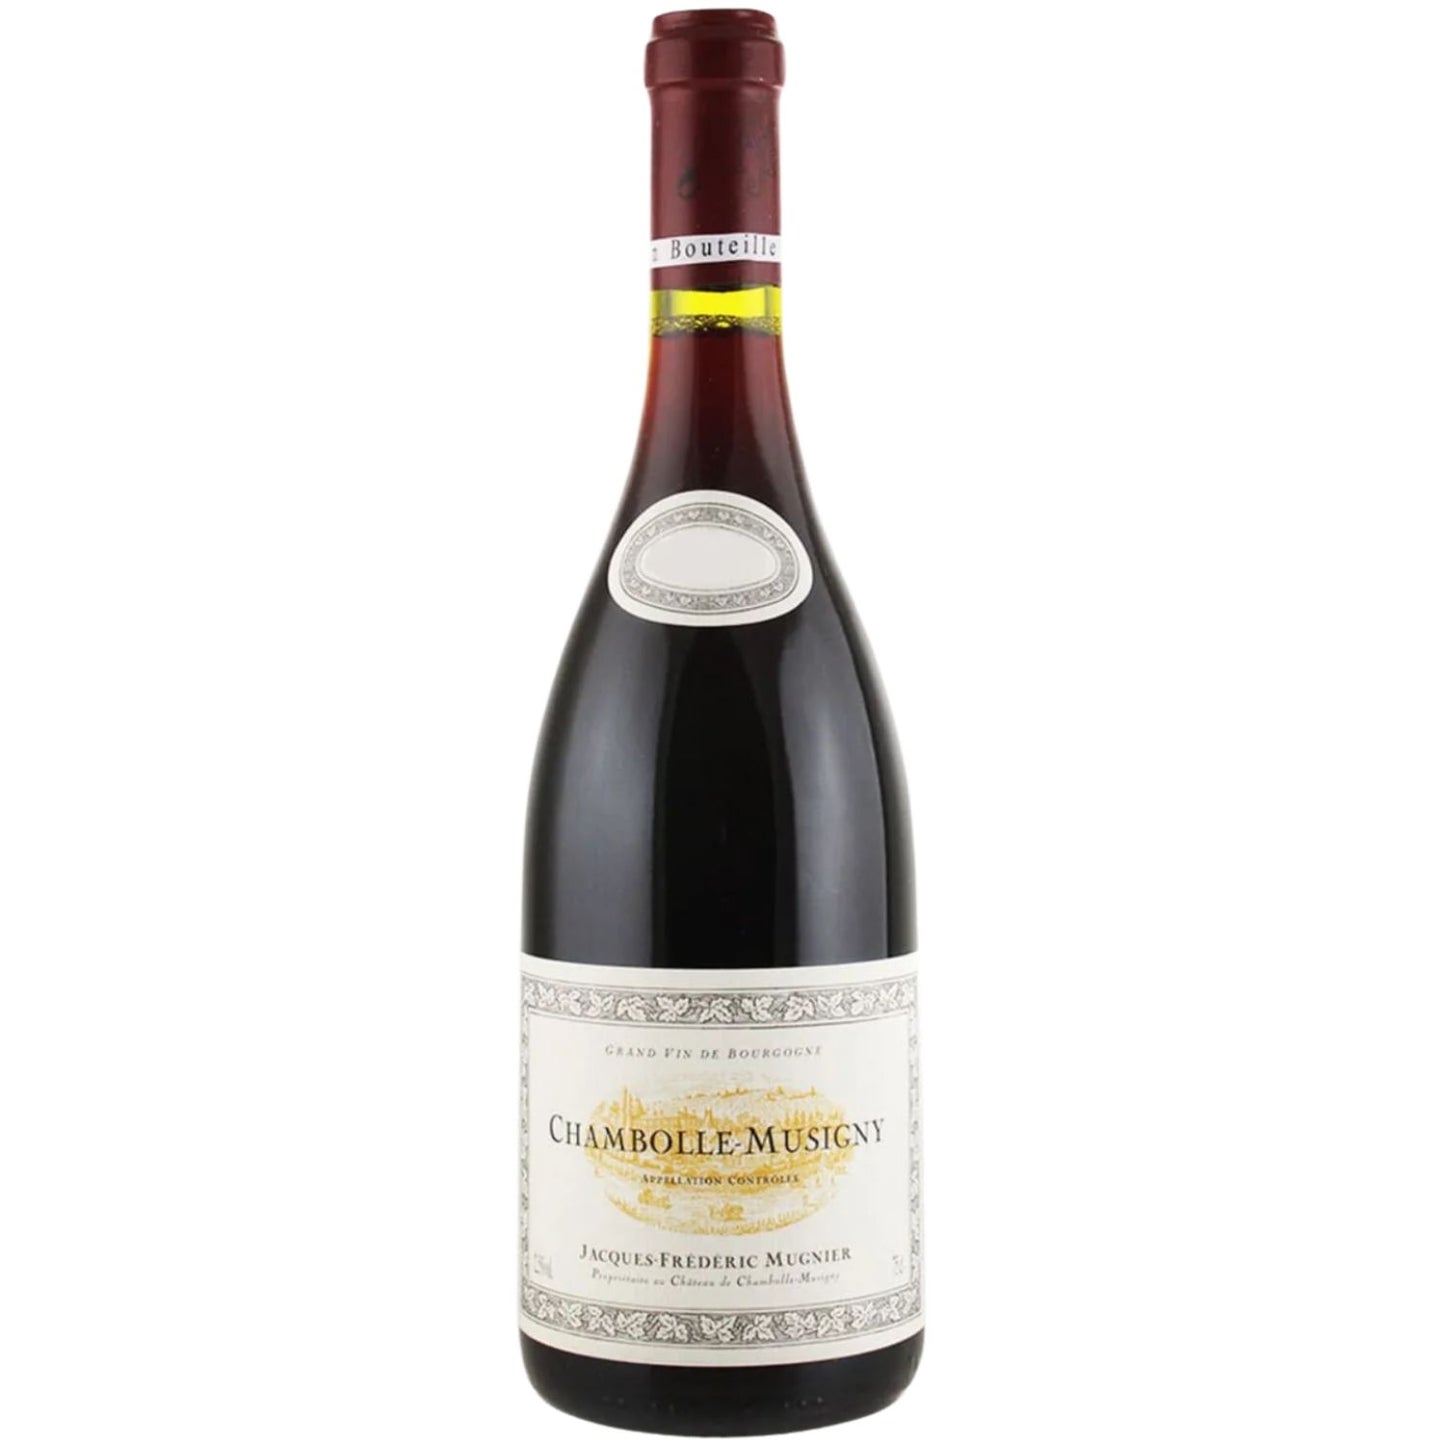 Jacques-Frederic Mugnier: Chambolle-Musigny 2019